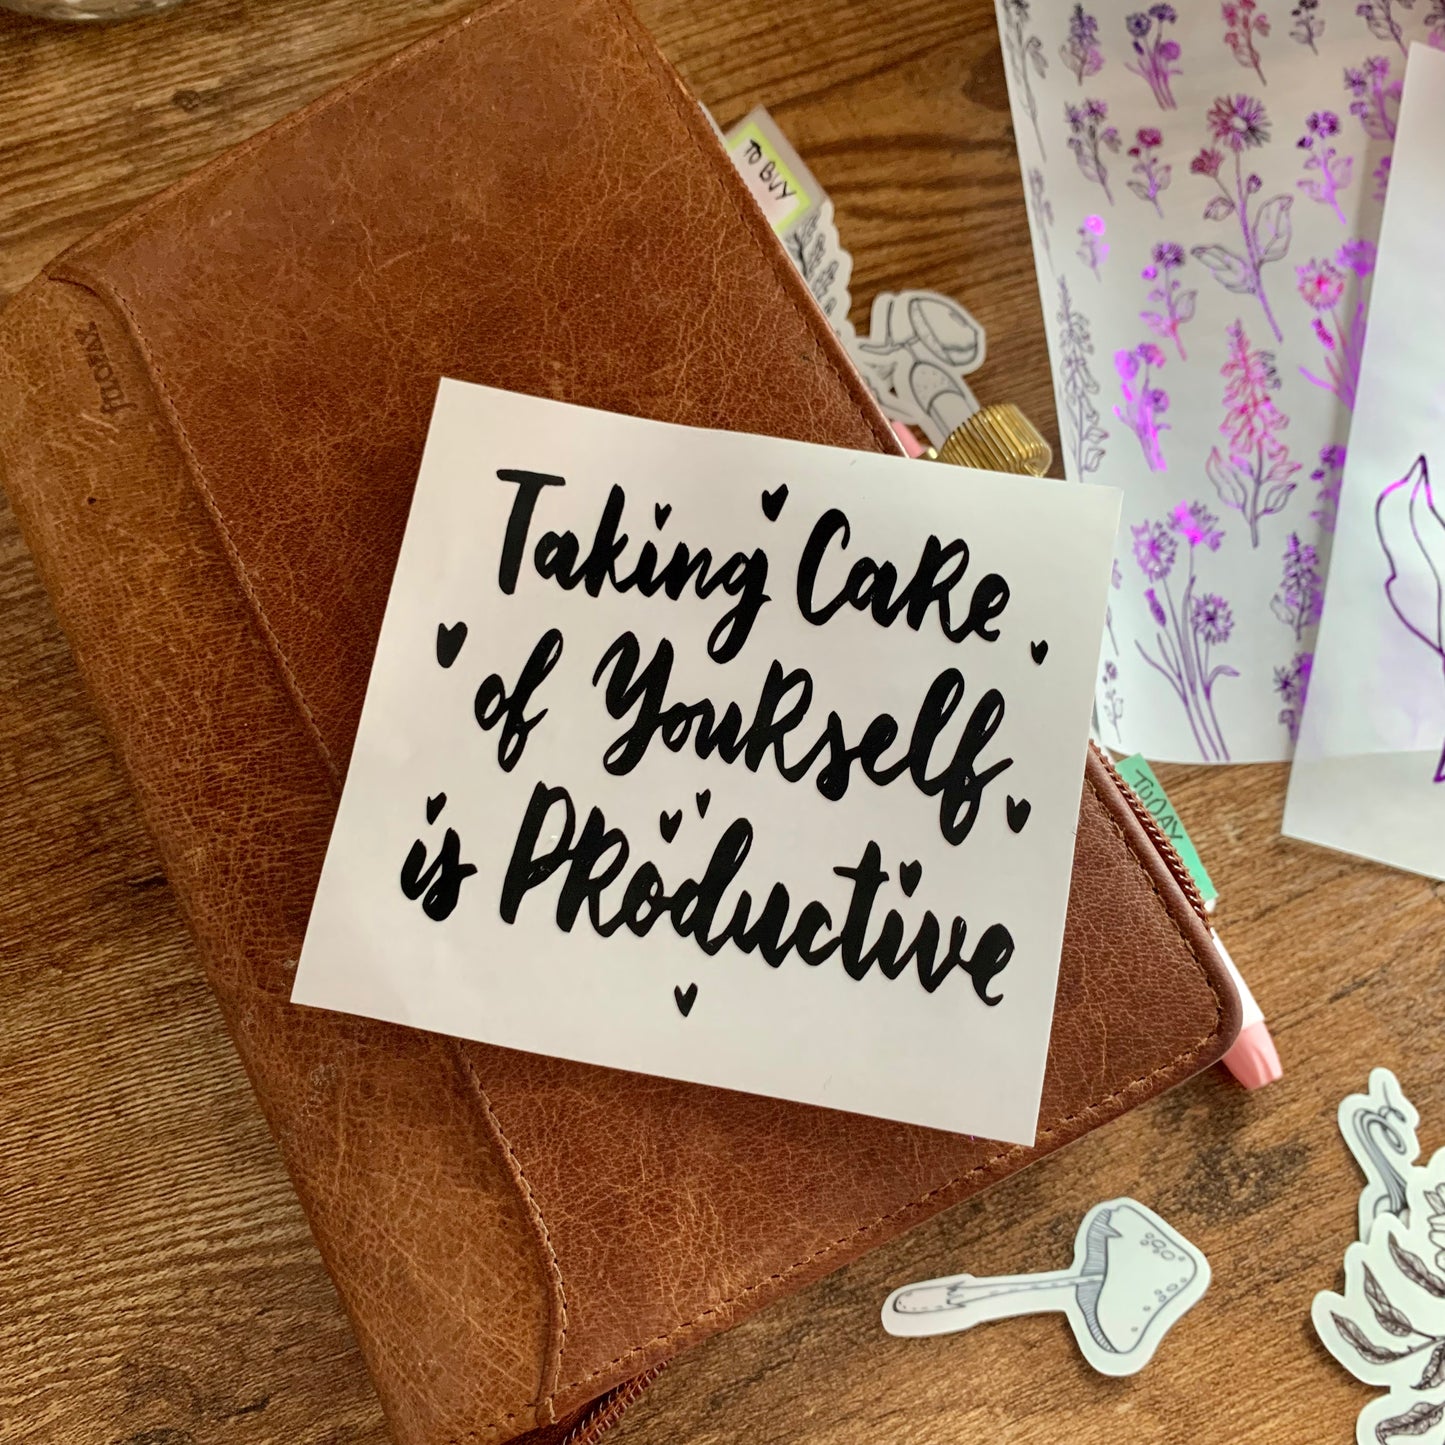 Motivational Quote Vinyl - Taking care of yourself is productive